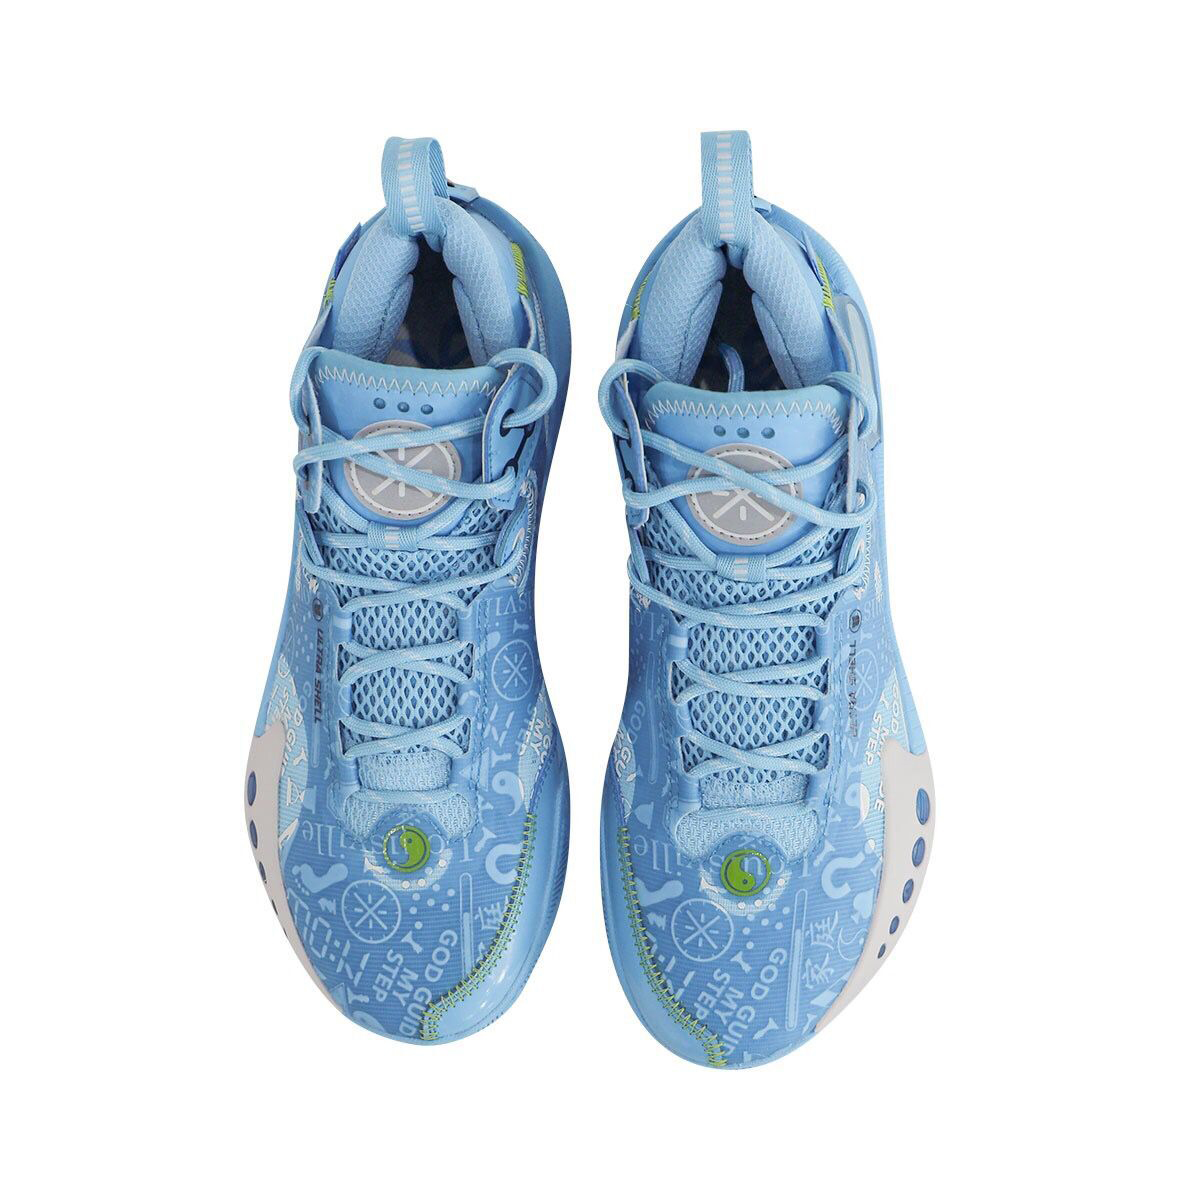 LiNing WOW9 Wade Shadow 3 “God Guide My step” Sky Blue Fashion Basketball  Shoes Limited Edition – LiNing Way of Wade Sneakers